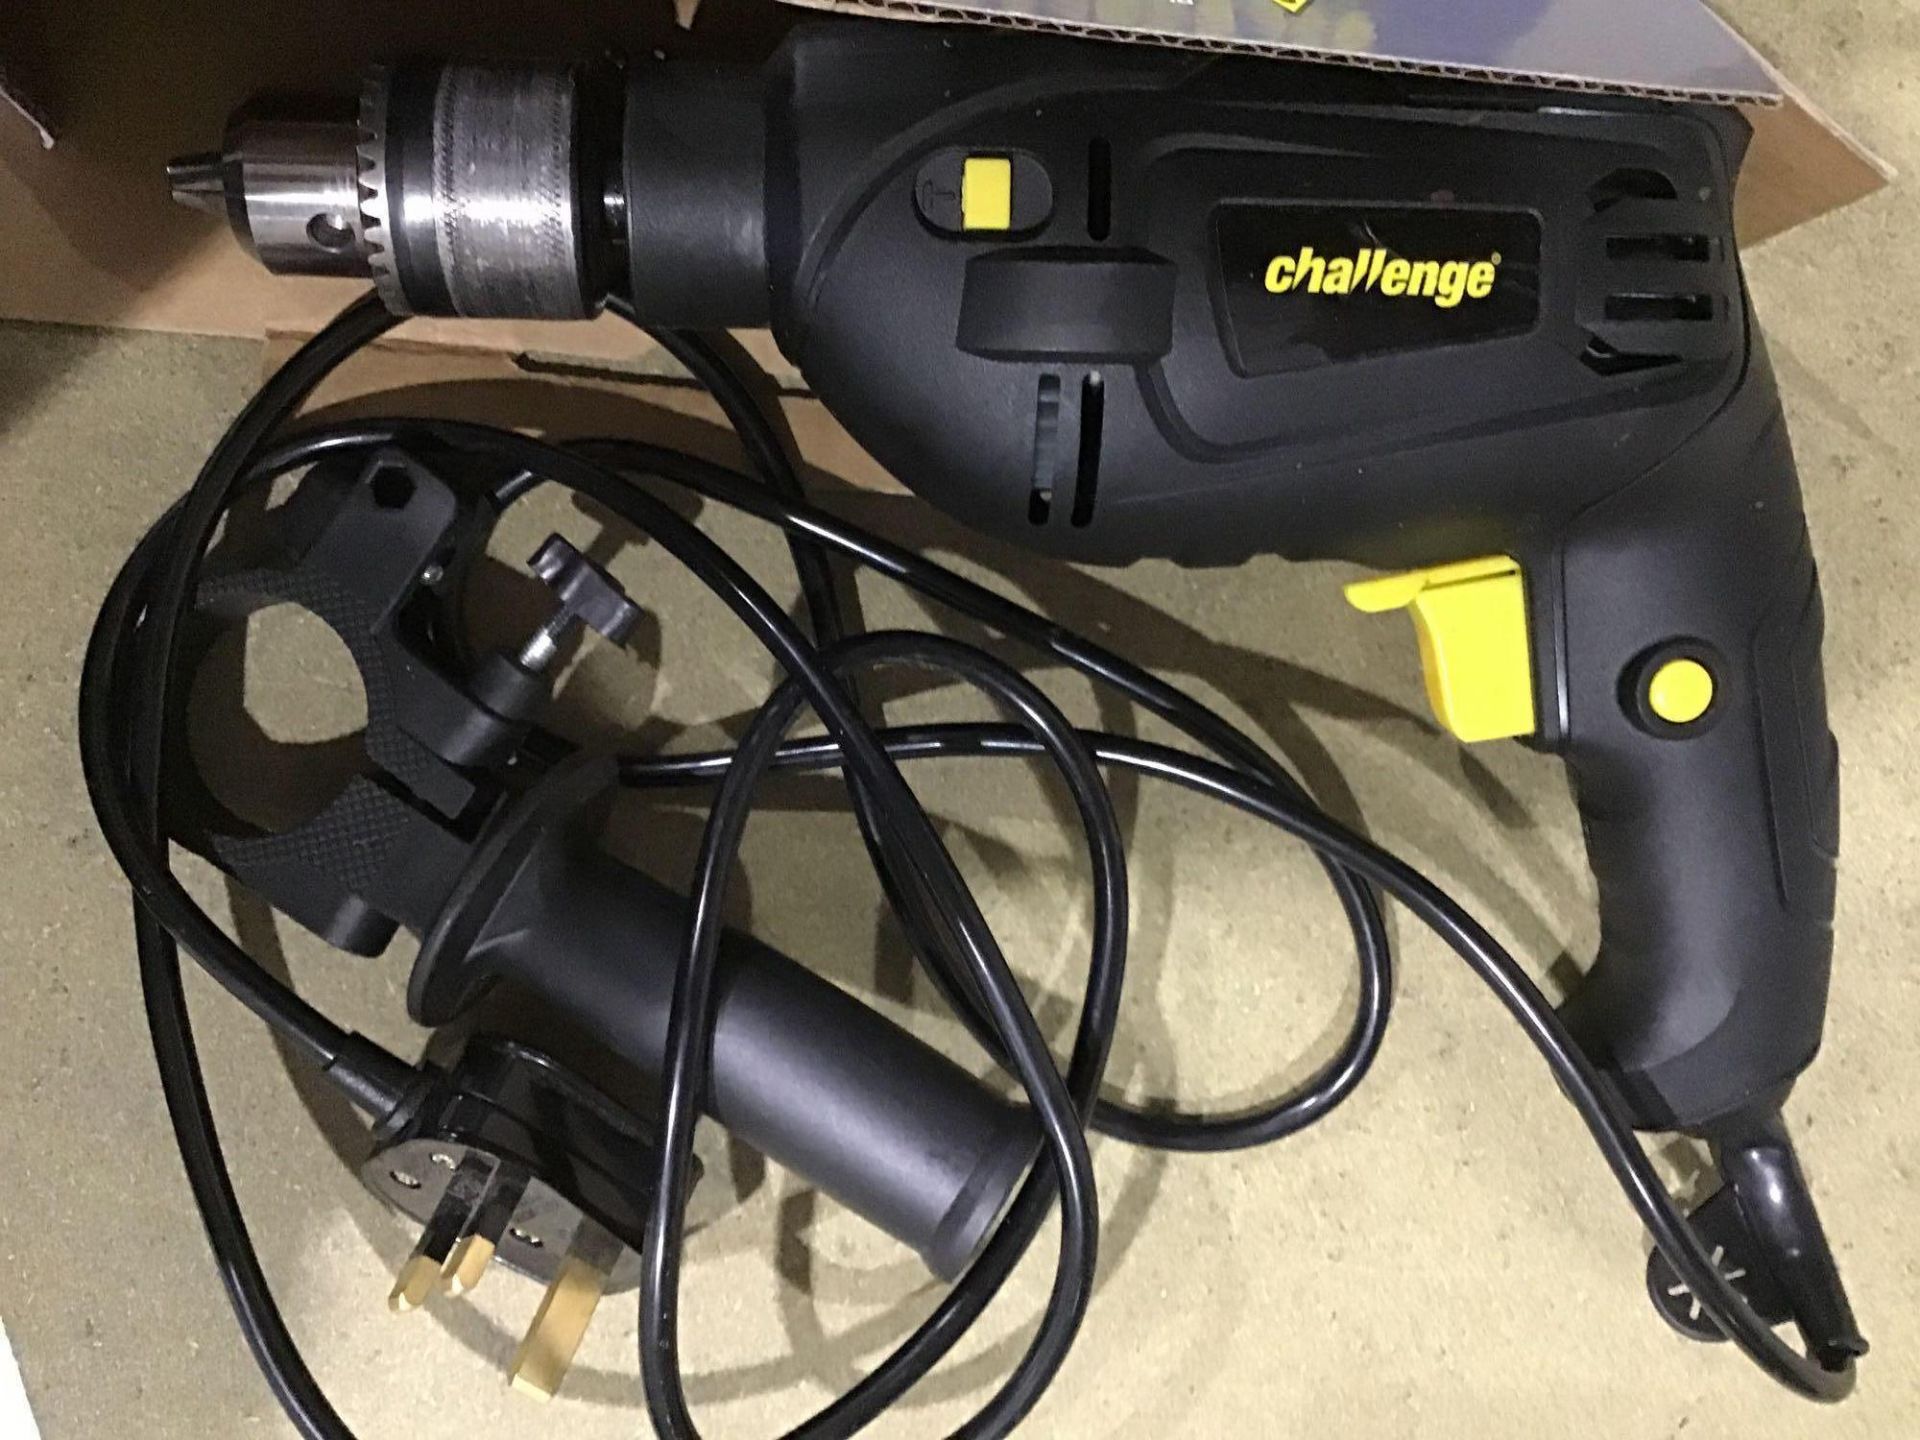 Challenge Corded Impact Drill - 500W - £15.00 RRP